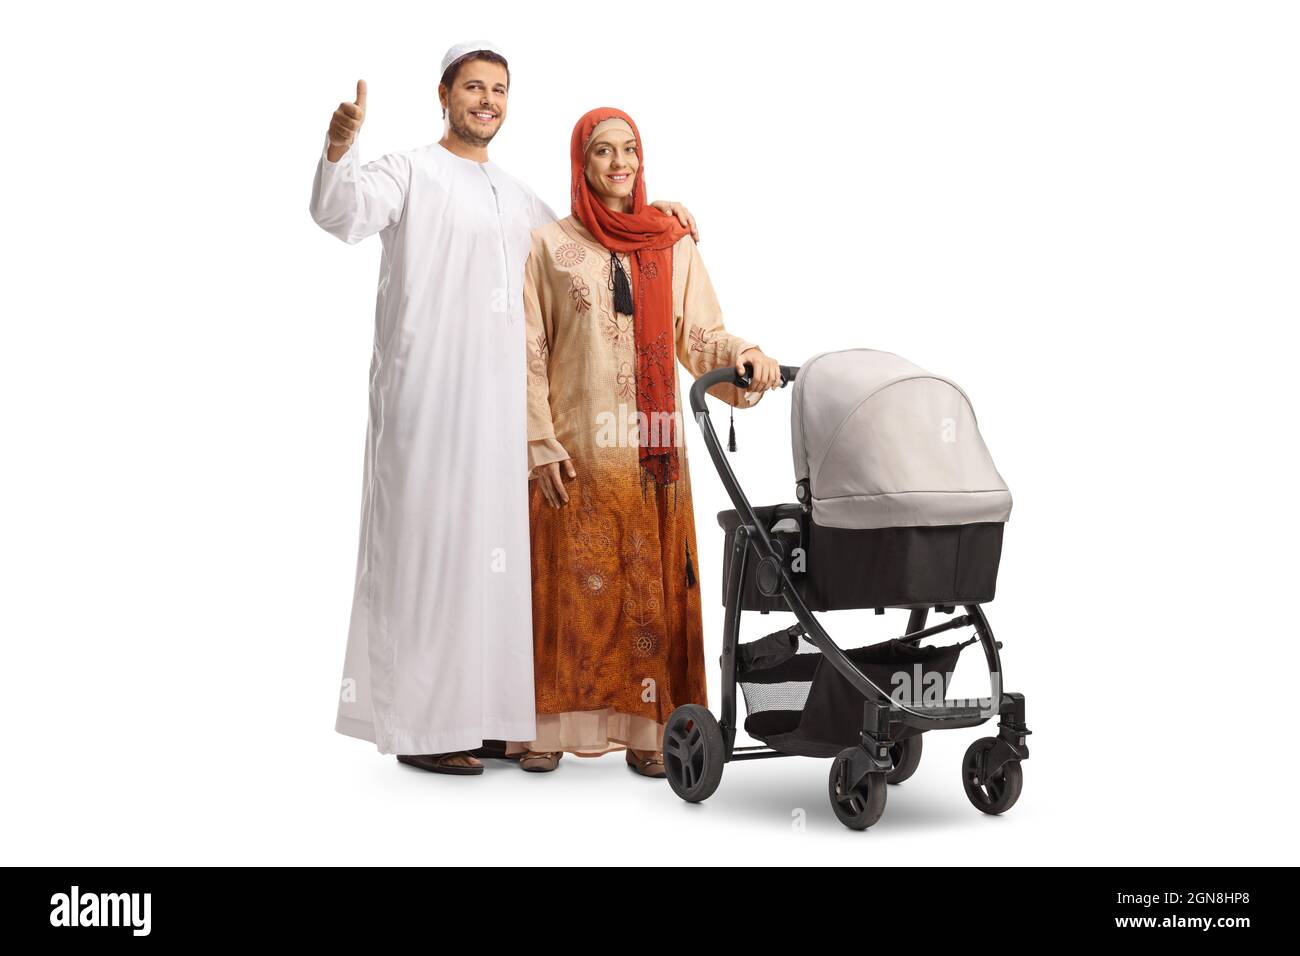 Full length portrait of a man and woman in ethnic clothes posing with a pushchair and gesturing thumbs up isolated on white background Stock Photo